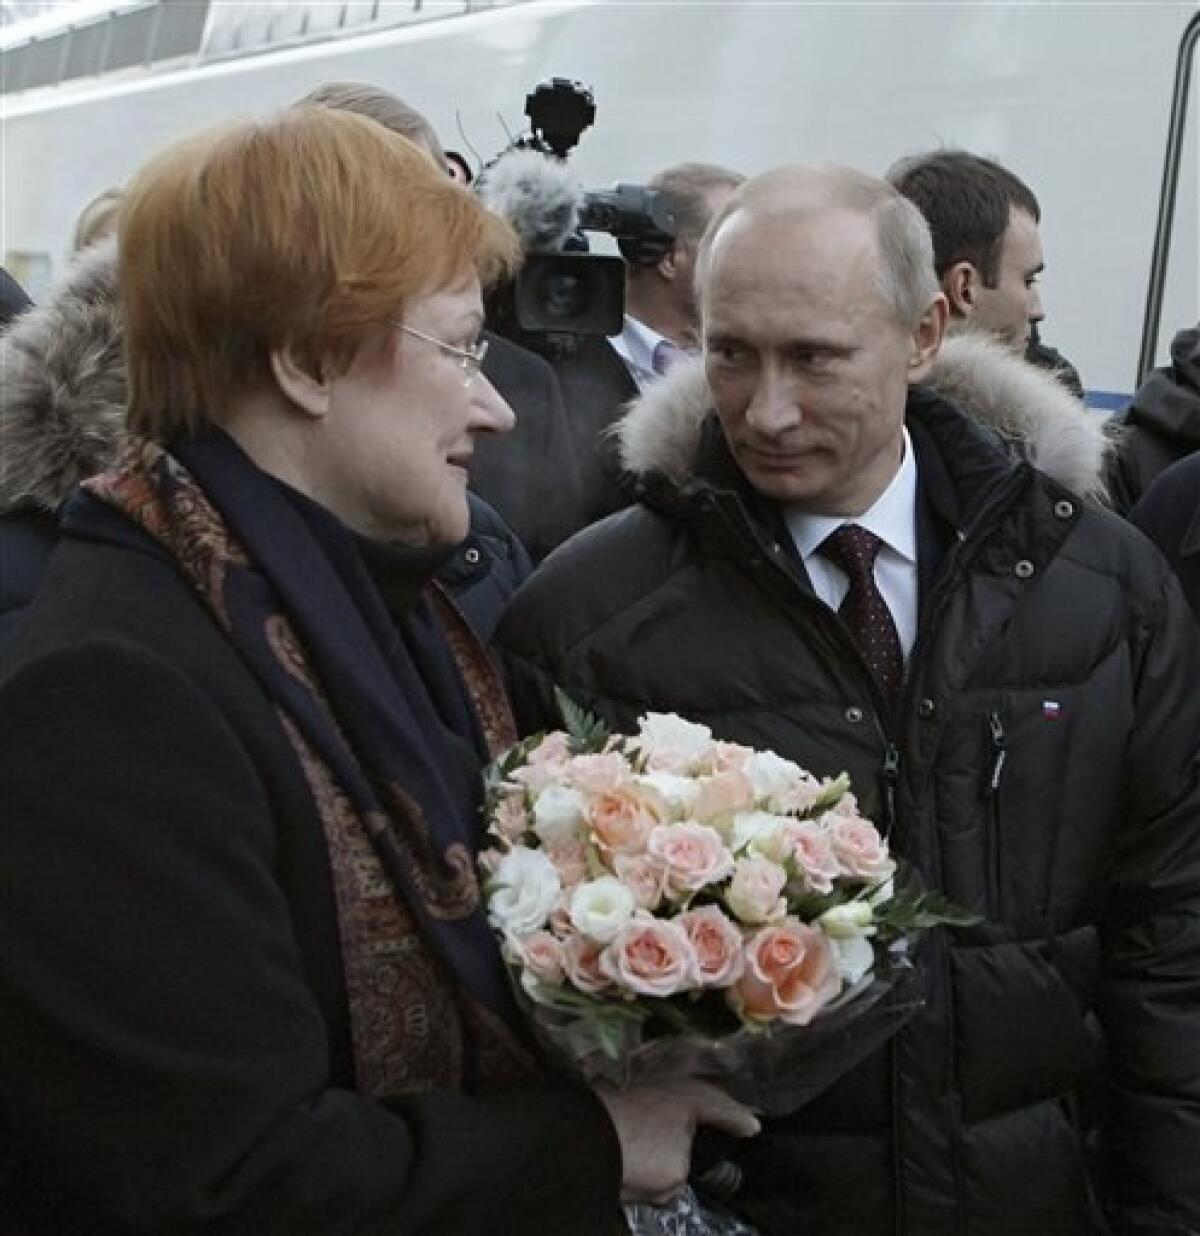 Russian Prime Minister Vladimir Putin, right, meets Finland's President Tarja Halonen who arrived by new high speed train in Vyborg, some 160 km (100 miles) west of St. Petersburg, Sunday Dec. 12, 2010. Halonen and Putin inaugurated the first high-speed rail link between the EU and Russia as new trains start running between Helsinki and St. Petersburg, shortening travel time by nearly half, boosting business travel and tourism. (AP Photo/RIA Novosti, Alexei Nikolsky, Pool)